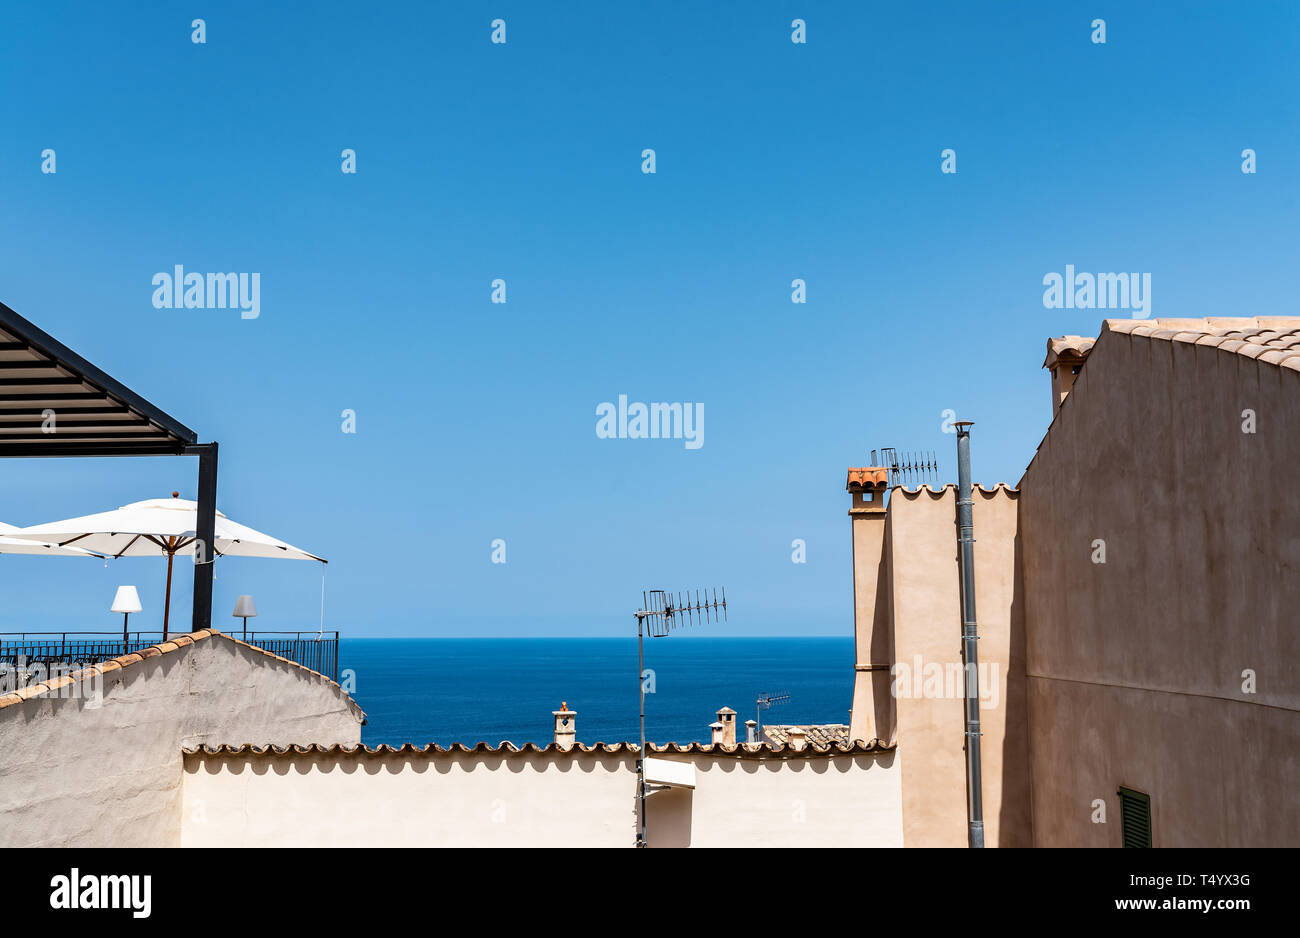 clear blue sky and ocean above rooftops of typical old houses in mediterranean village Stock Photo